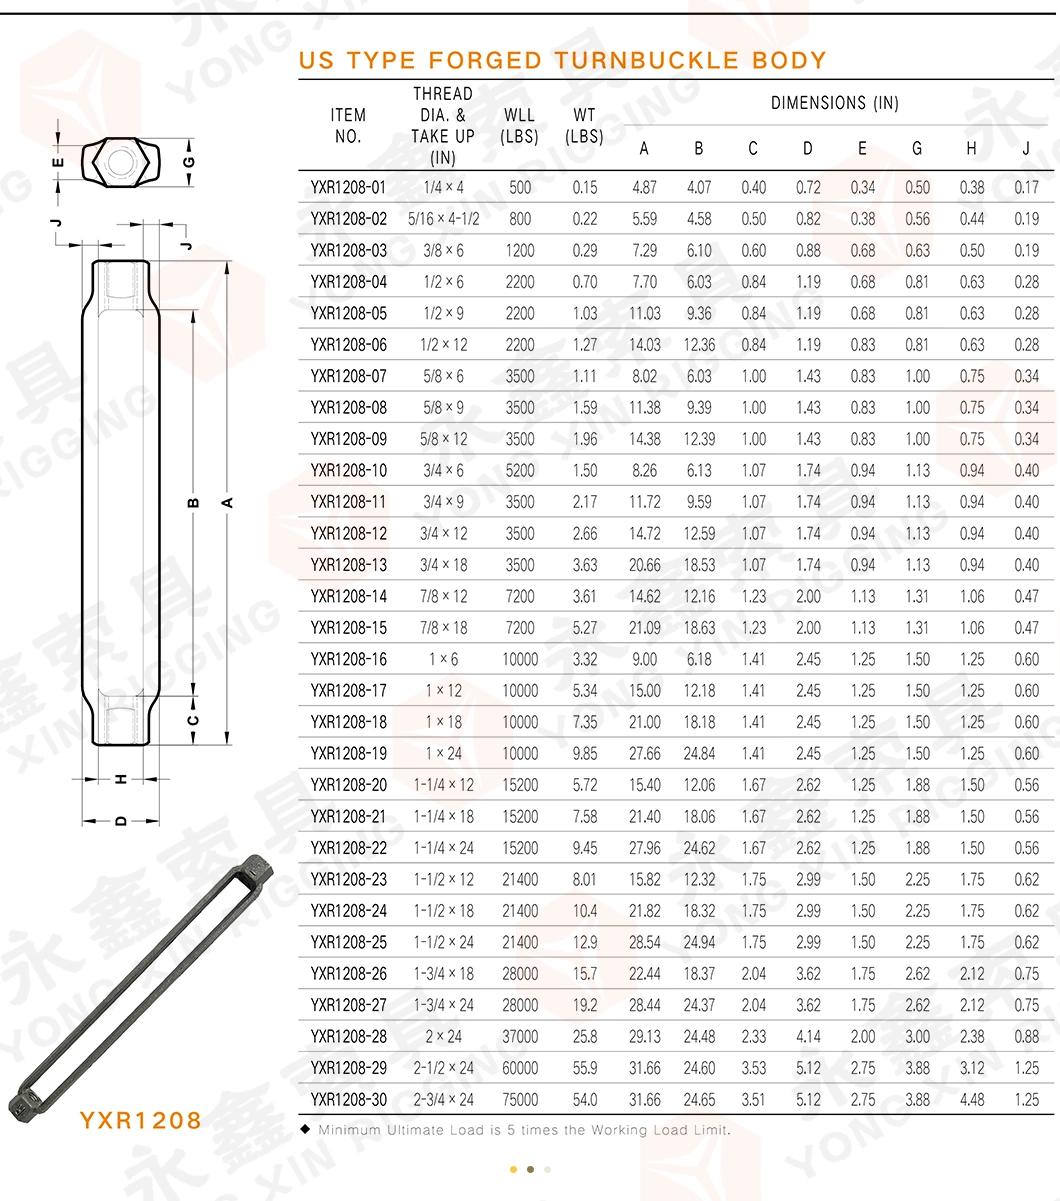 DIN DIN 1480 High Quality M20 20 mm 20mm Galvanized Steel Wire Rope Turnbuckle Hook and Eye Turnbuckle